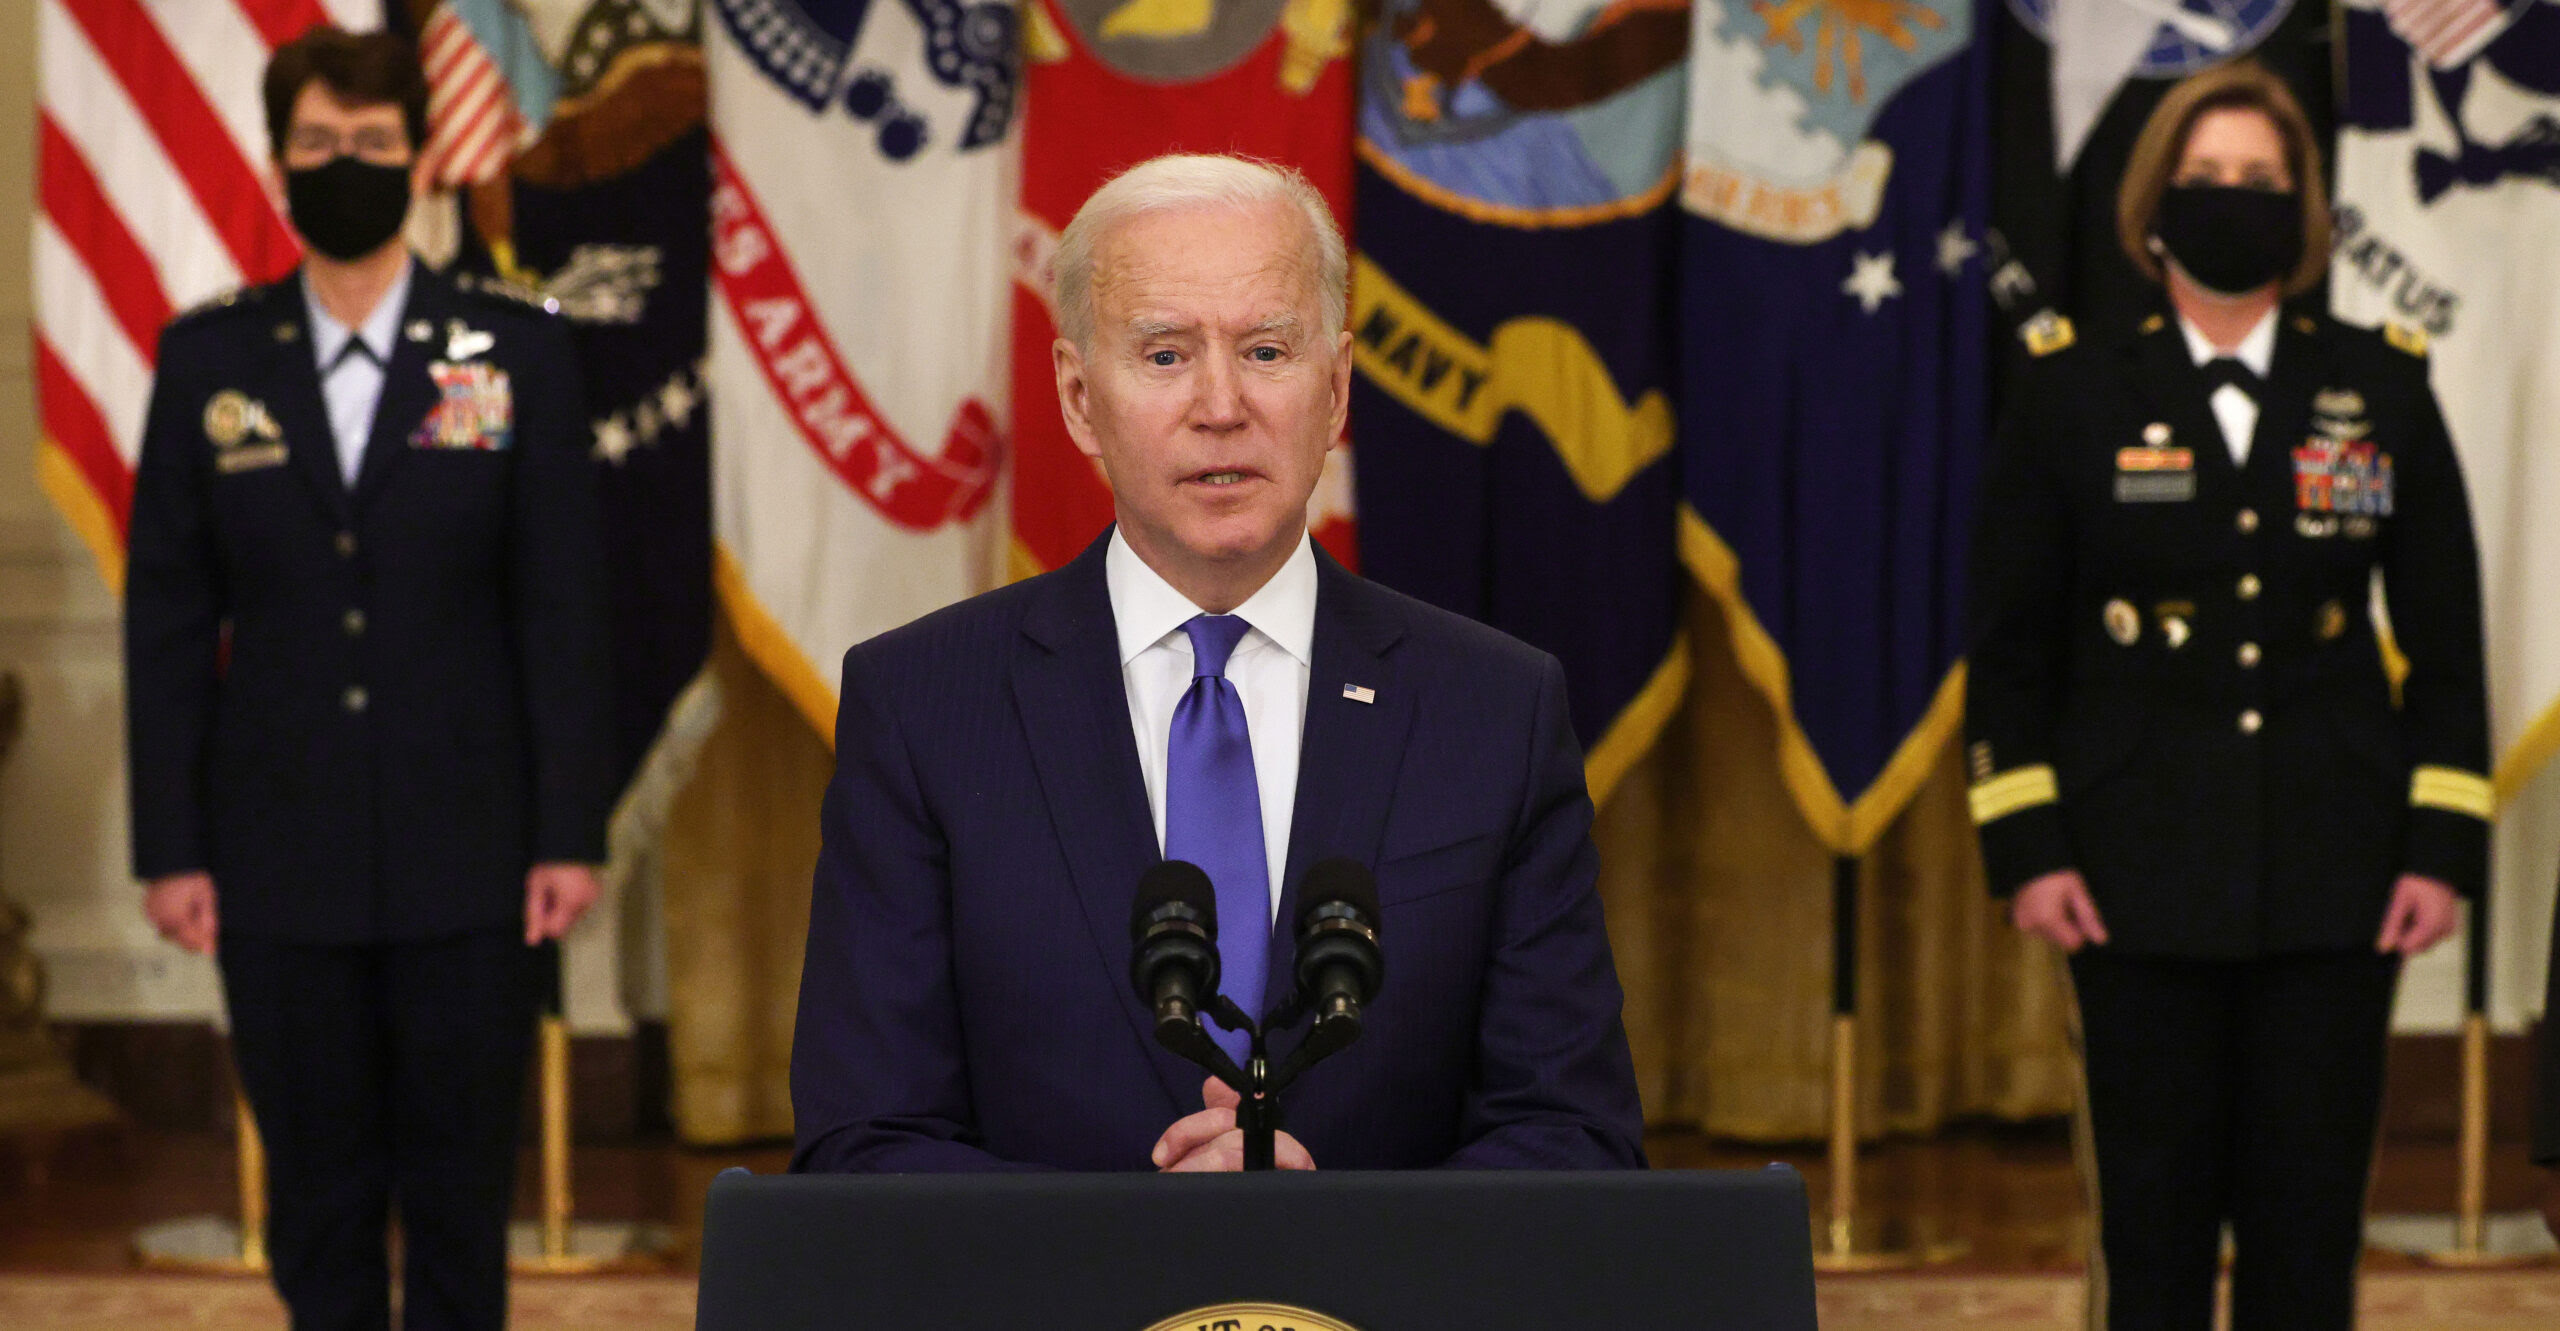 ICYMI: Biden Prepares to Strip College Students of Due Process Rights